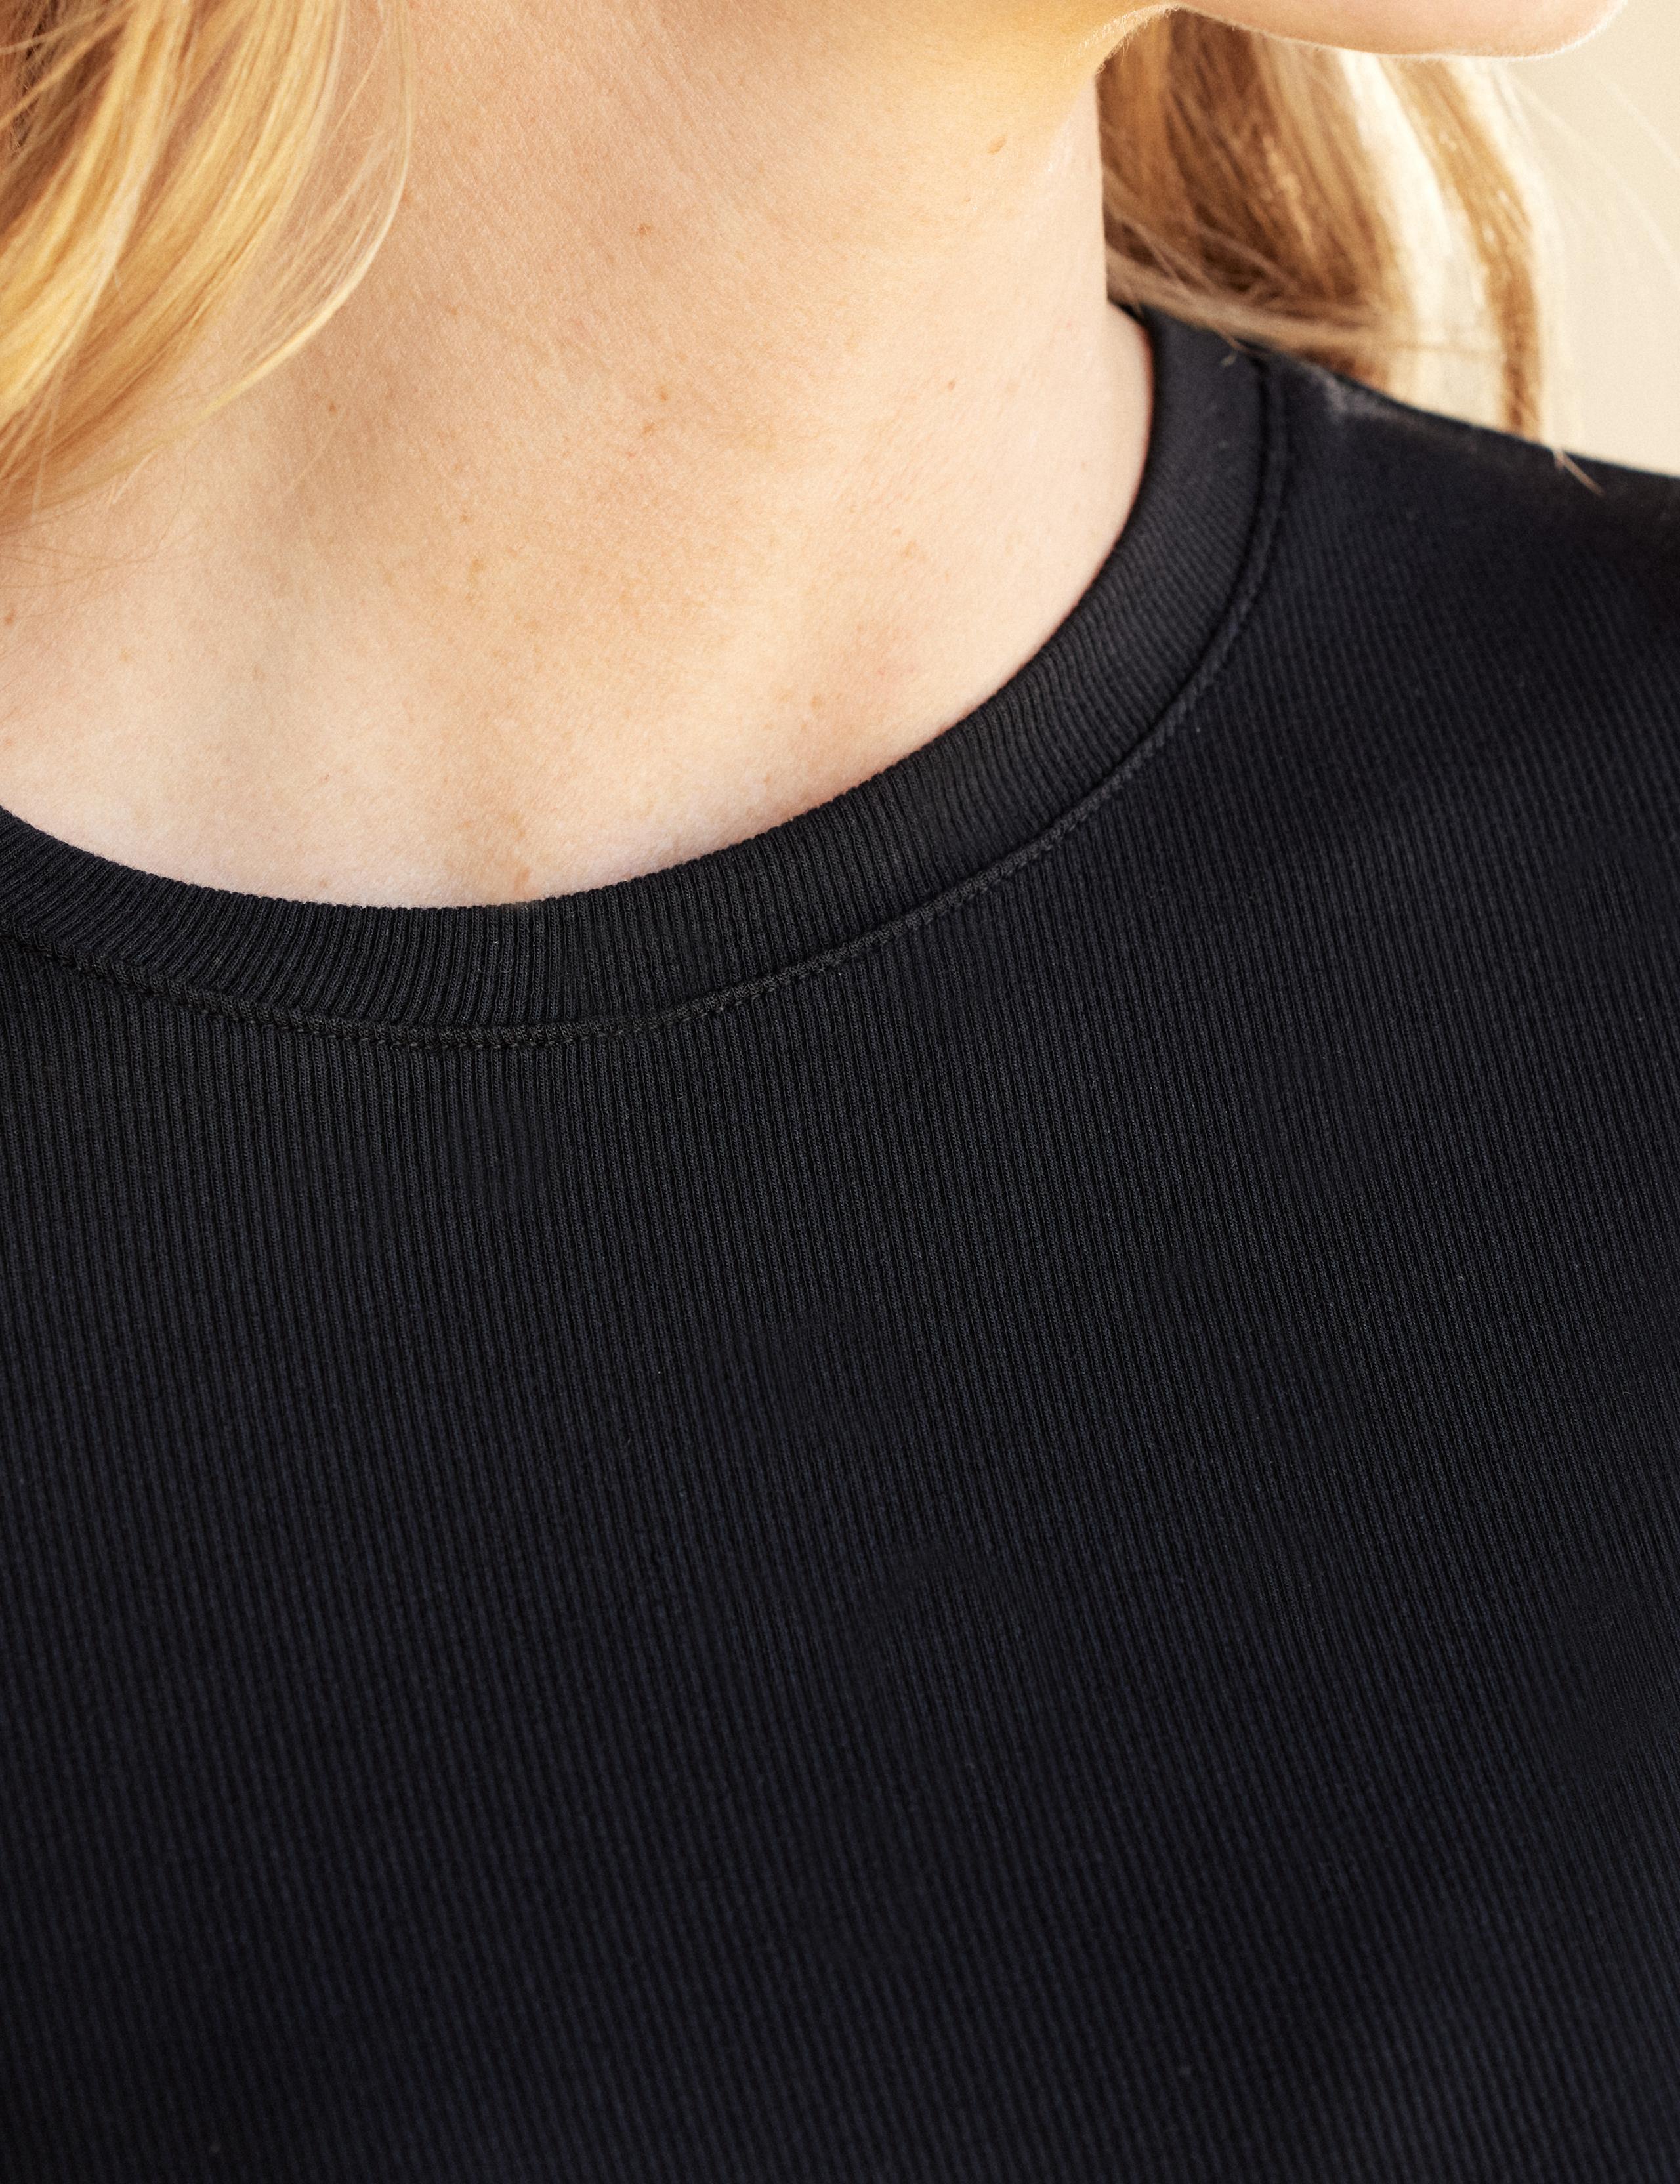 Detail view of neckline of woman wearing Legacy Long-Sleeve Crew